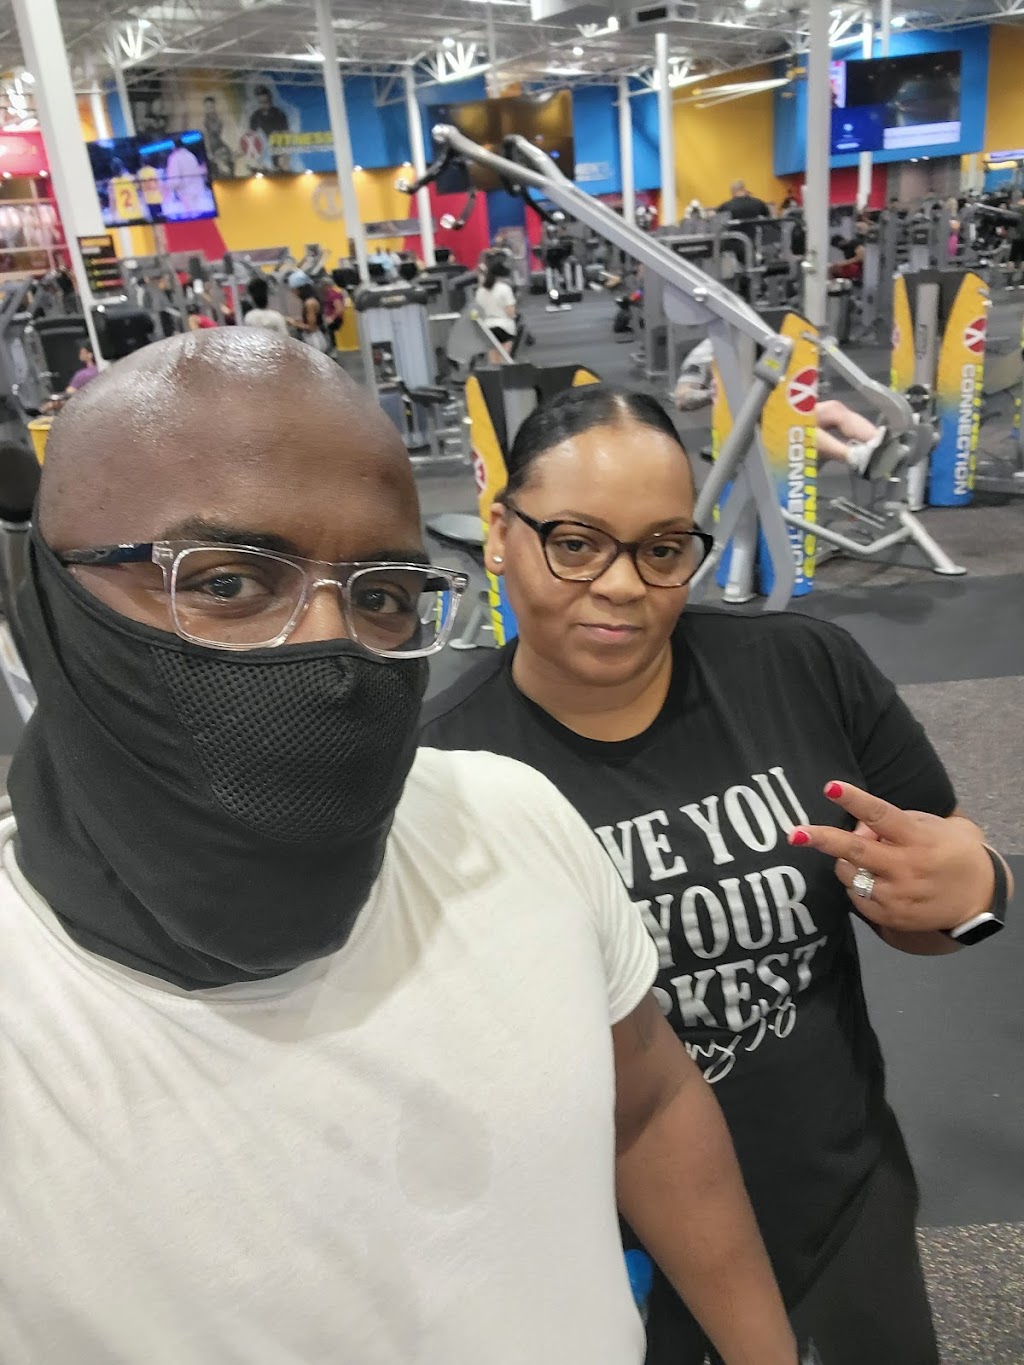 Fitness Connection | 4126 S Carrier Pkwy, Grand Prairie, TX 75052, USA | Phone: (469) 788-7100